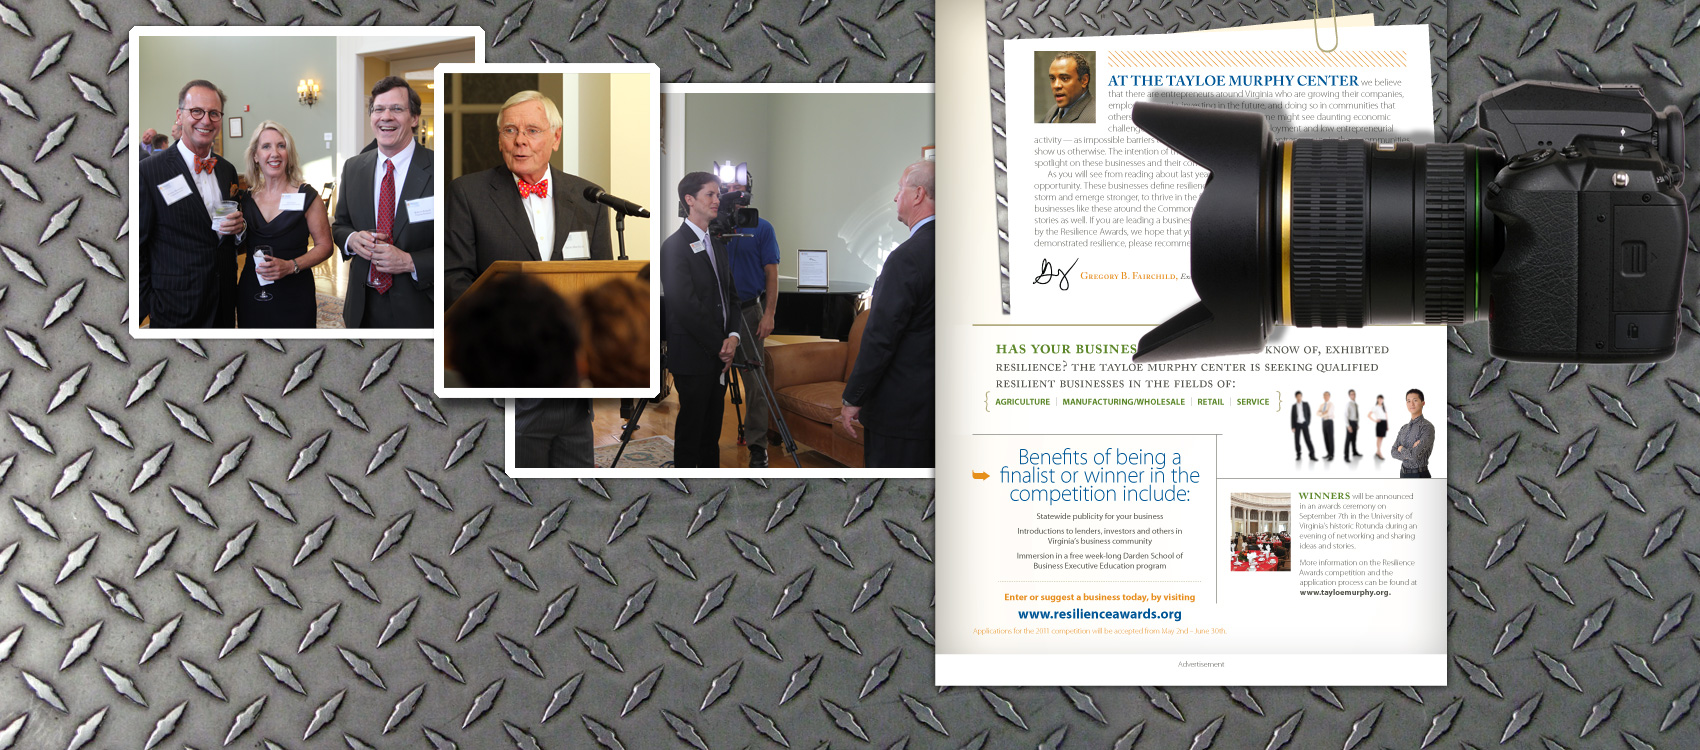 Booklet design for Taylor Murphy Resilience Awards at UVA Darden School of Business